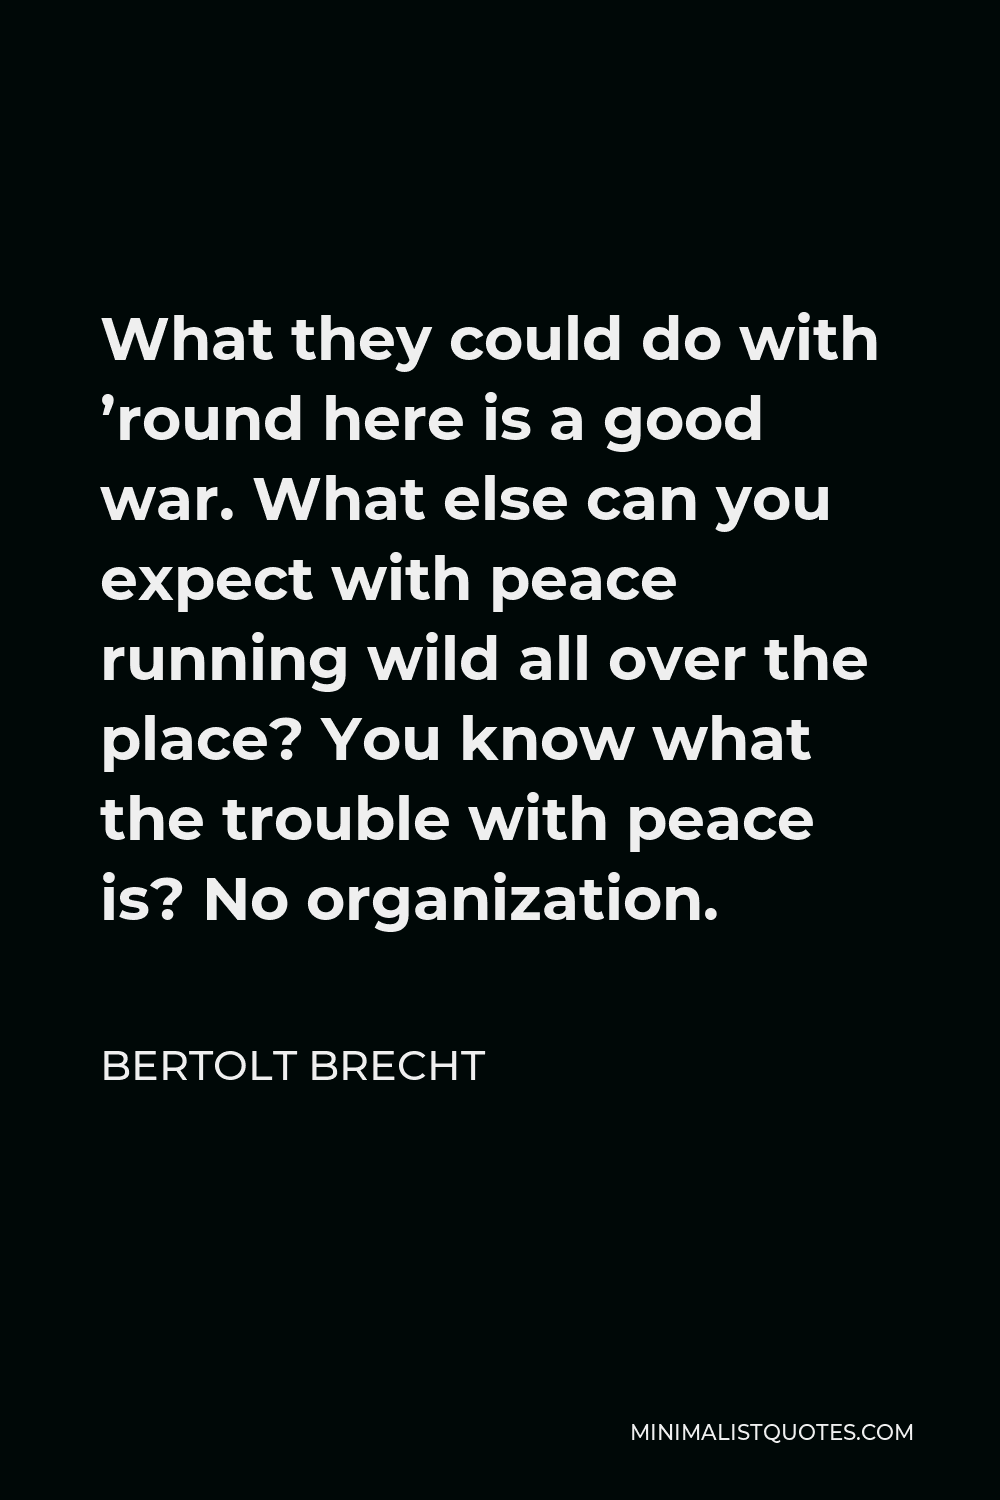 Bertolt Brecht Quote - What they could do with ’round here is a good war. What else can you expect with peace running wild all over the place? You know what the trouble with peace is? No organization.